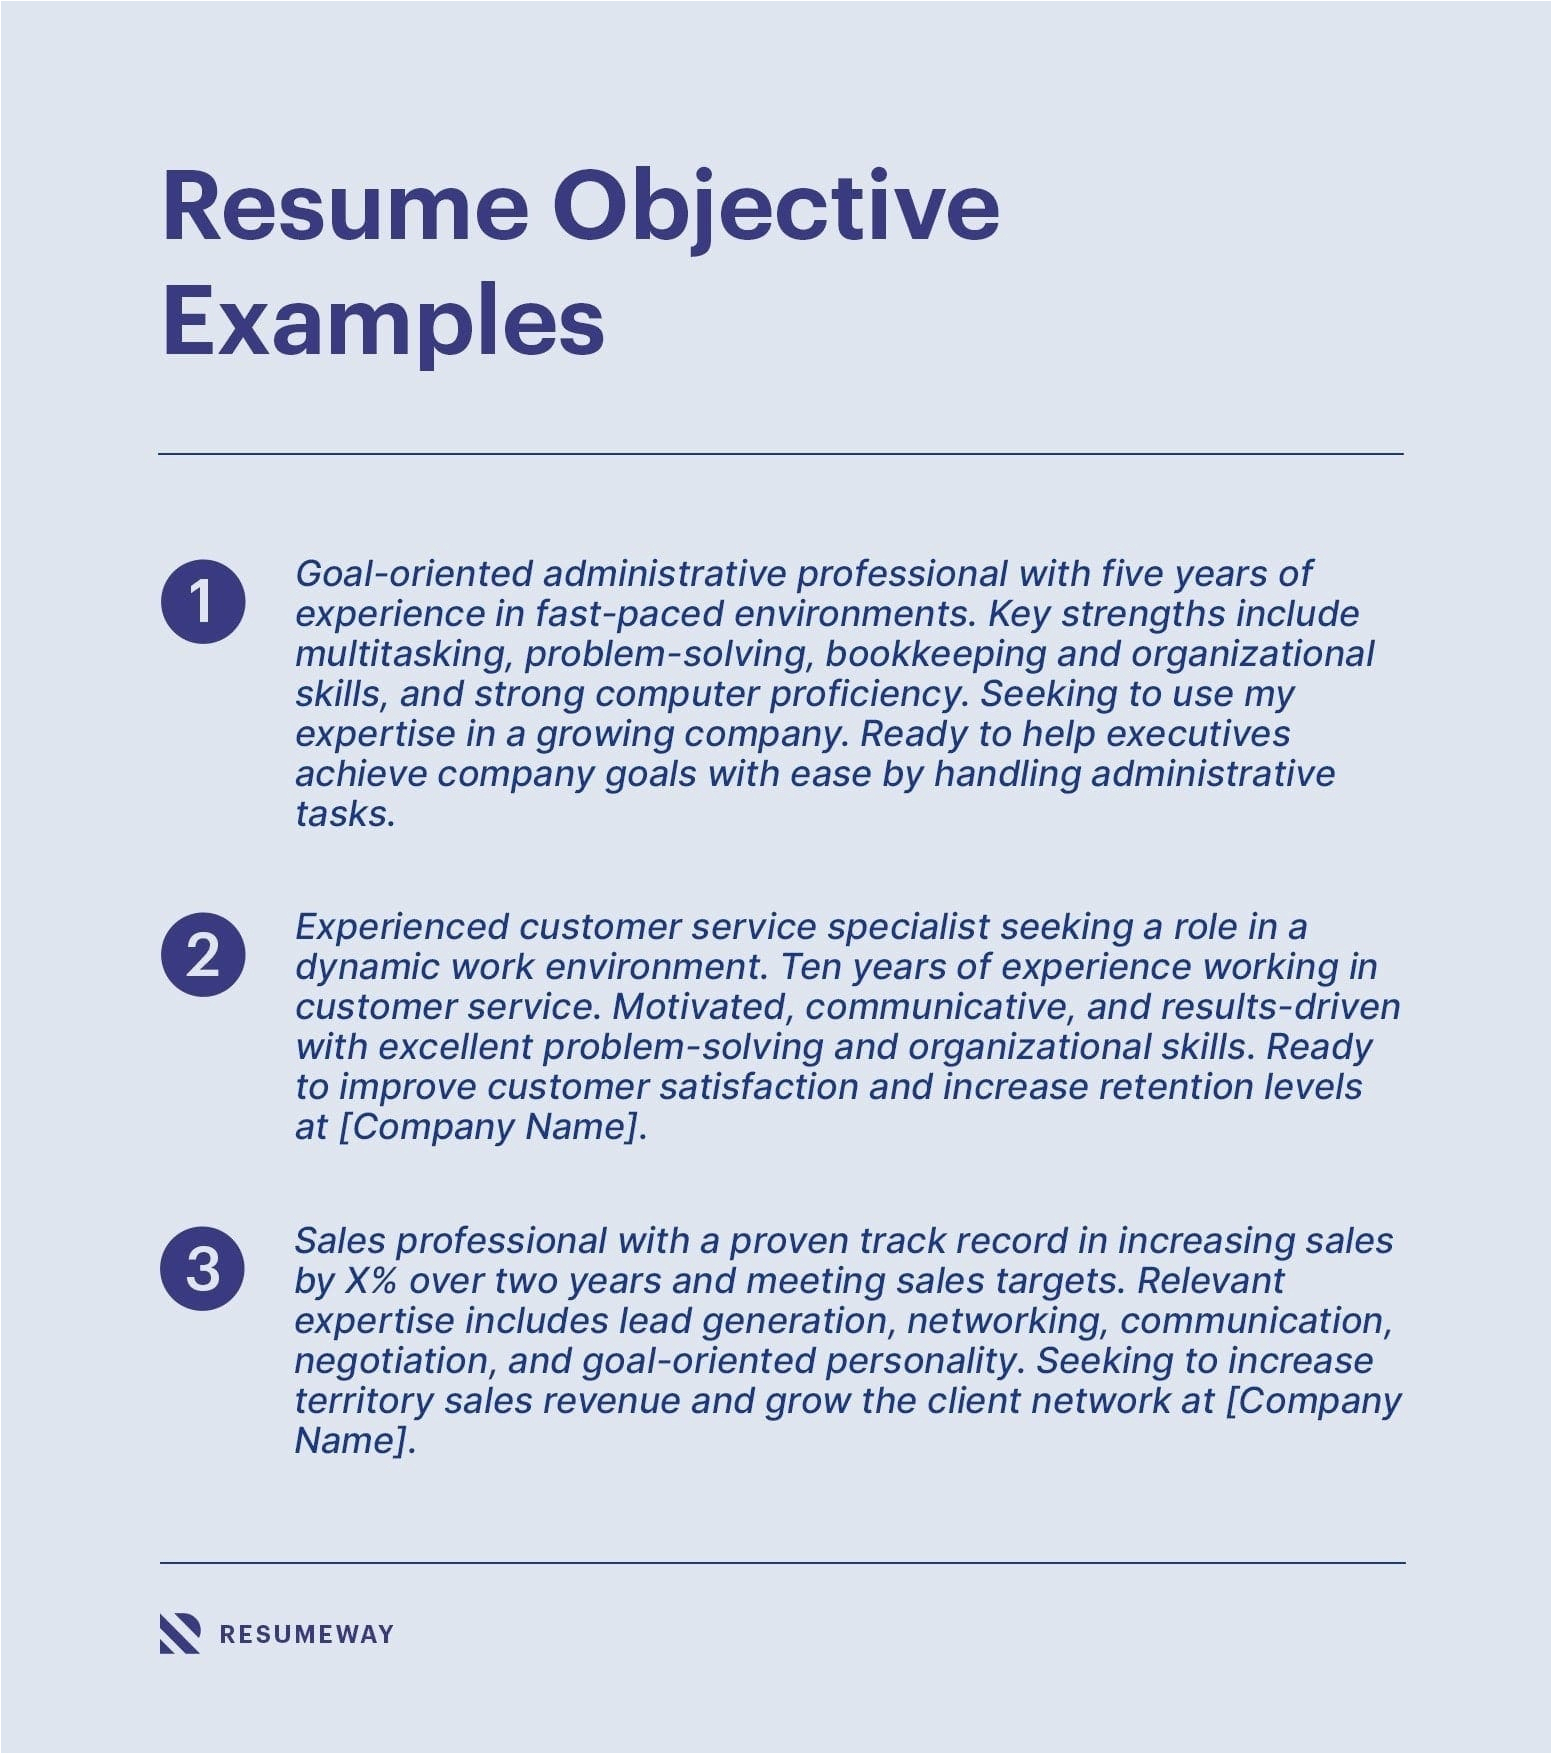 Samples Of A Good Resume Objective Resume Objective Examples for 2022 [ How to Guide]